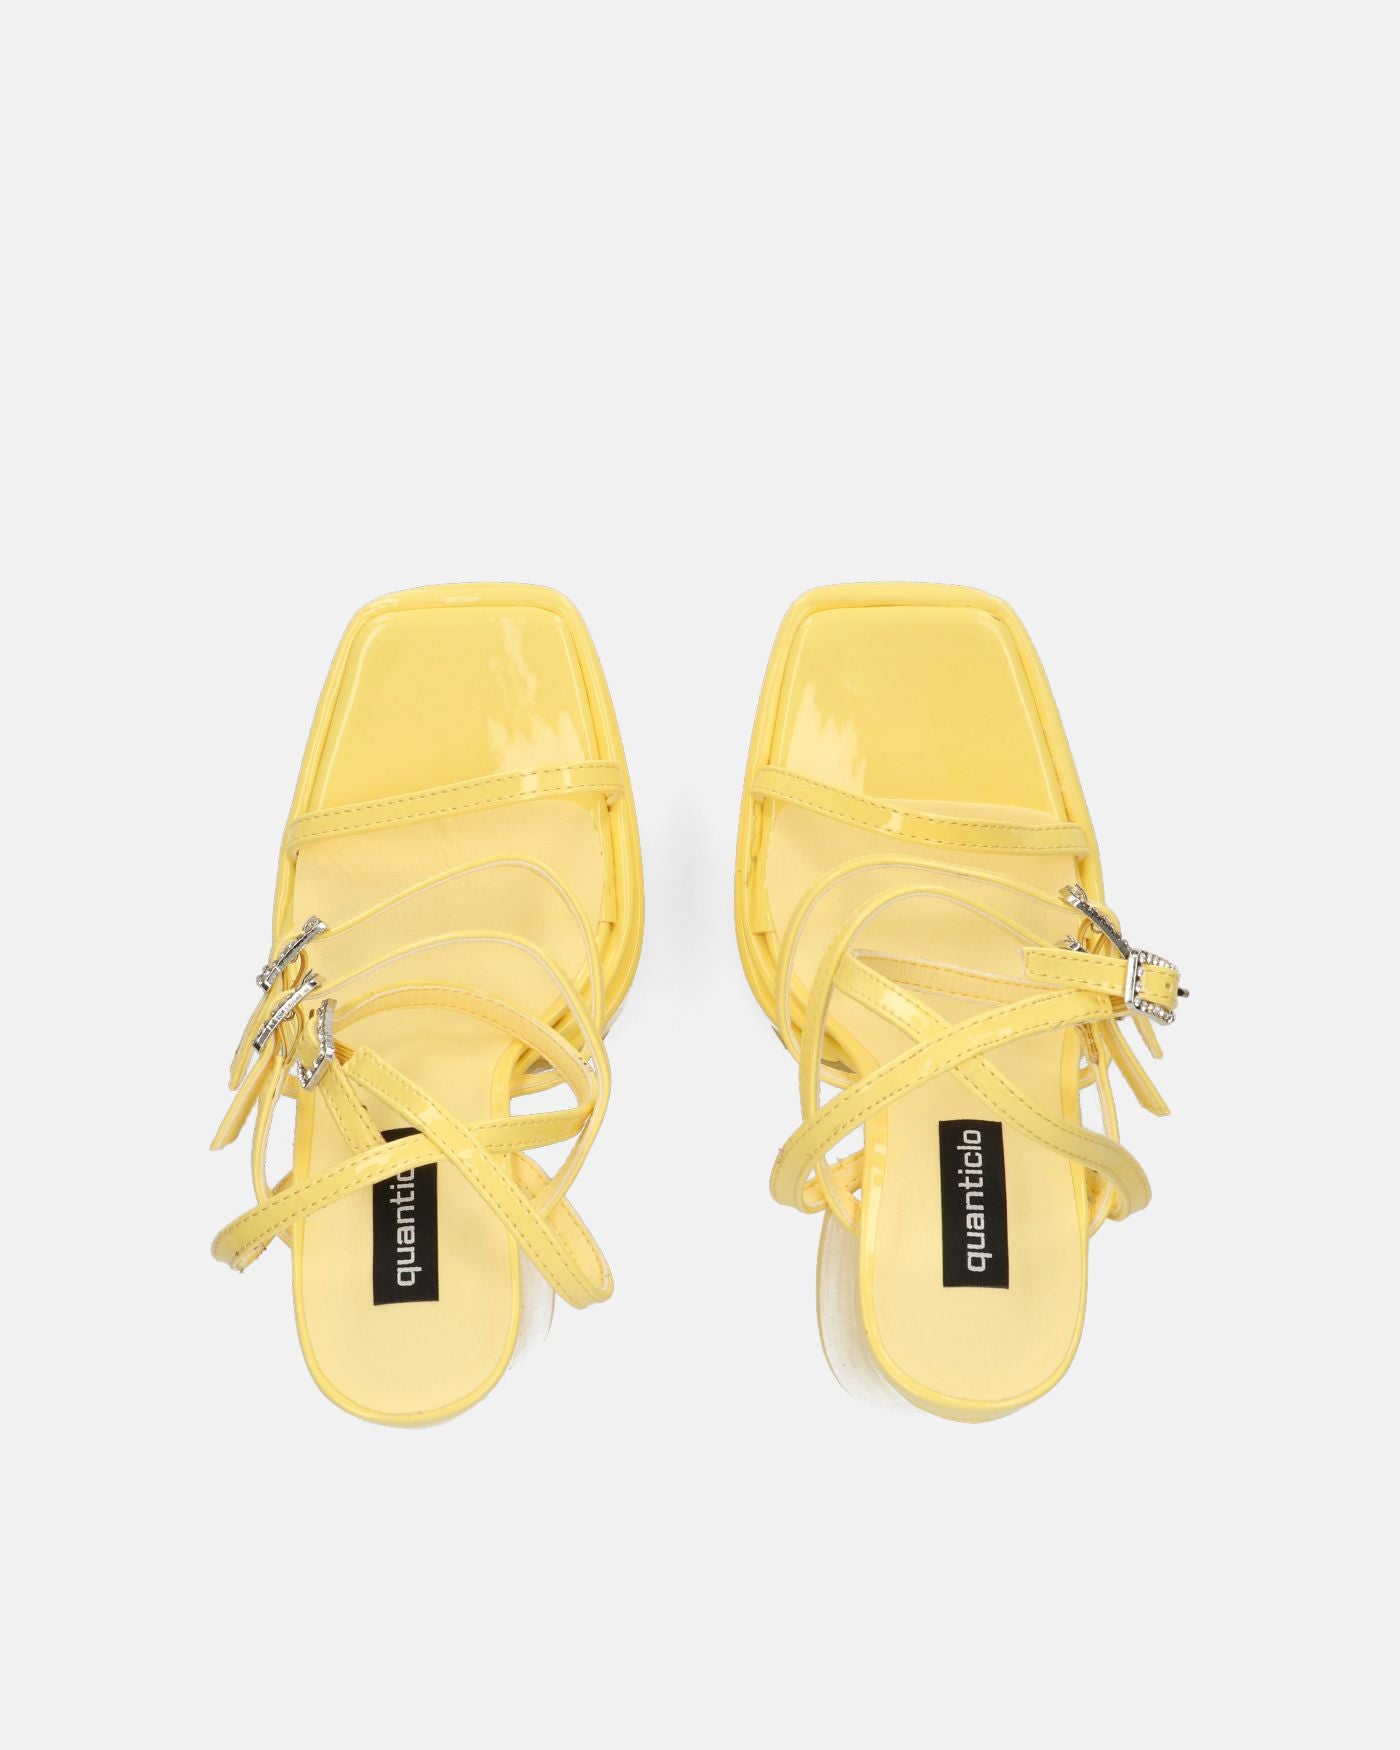 TEXA - sandals with strap and high heel in yellow